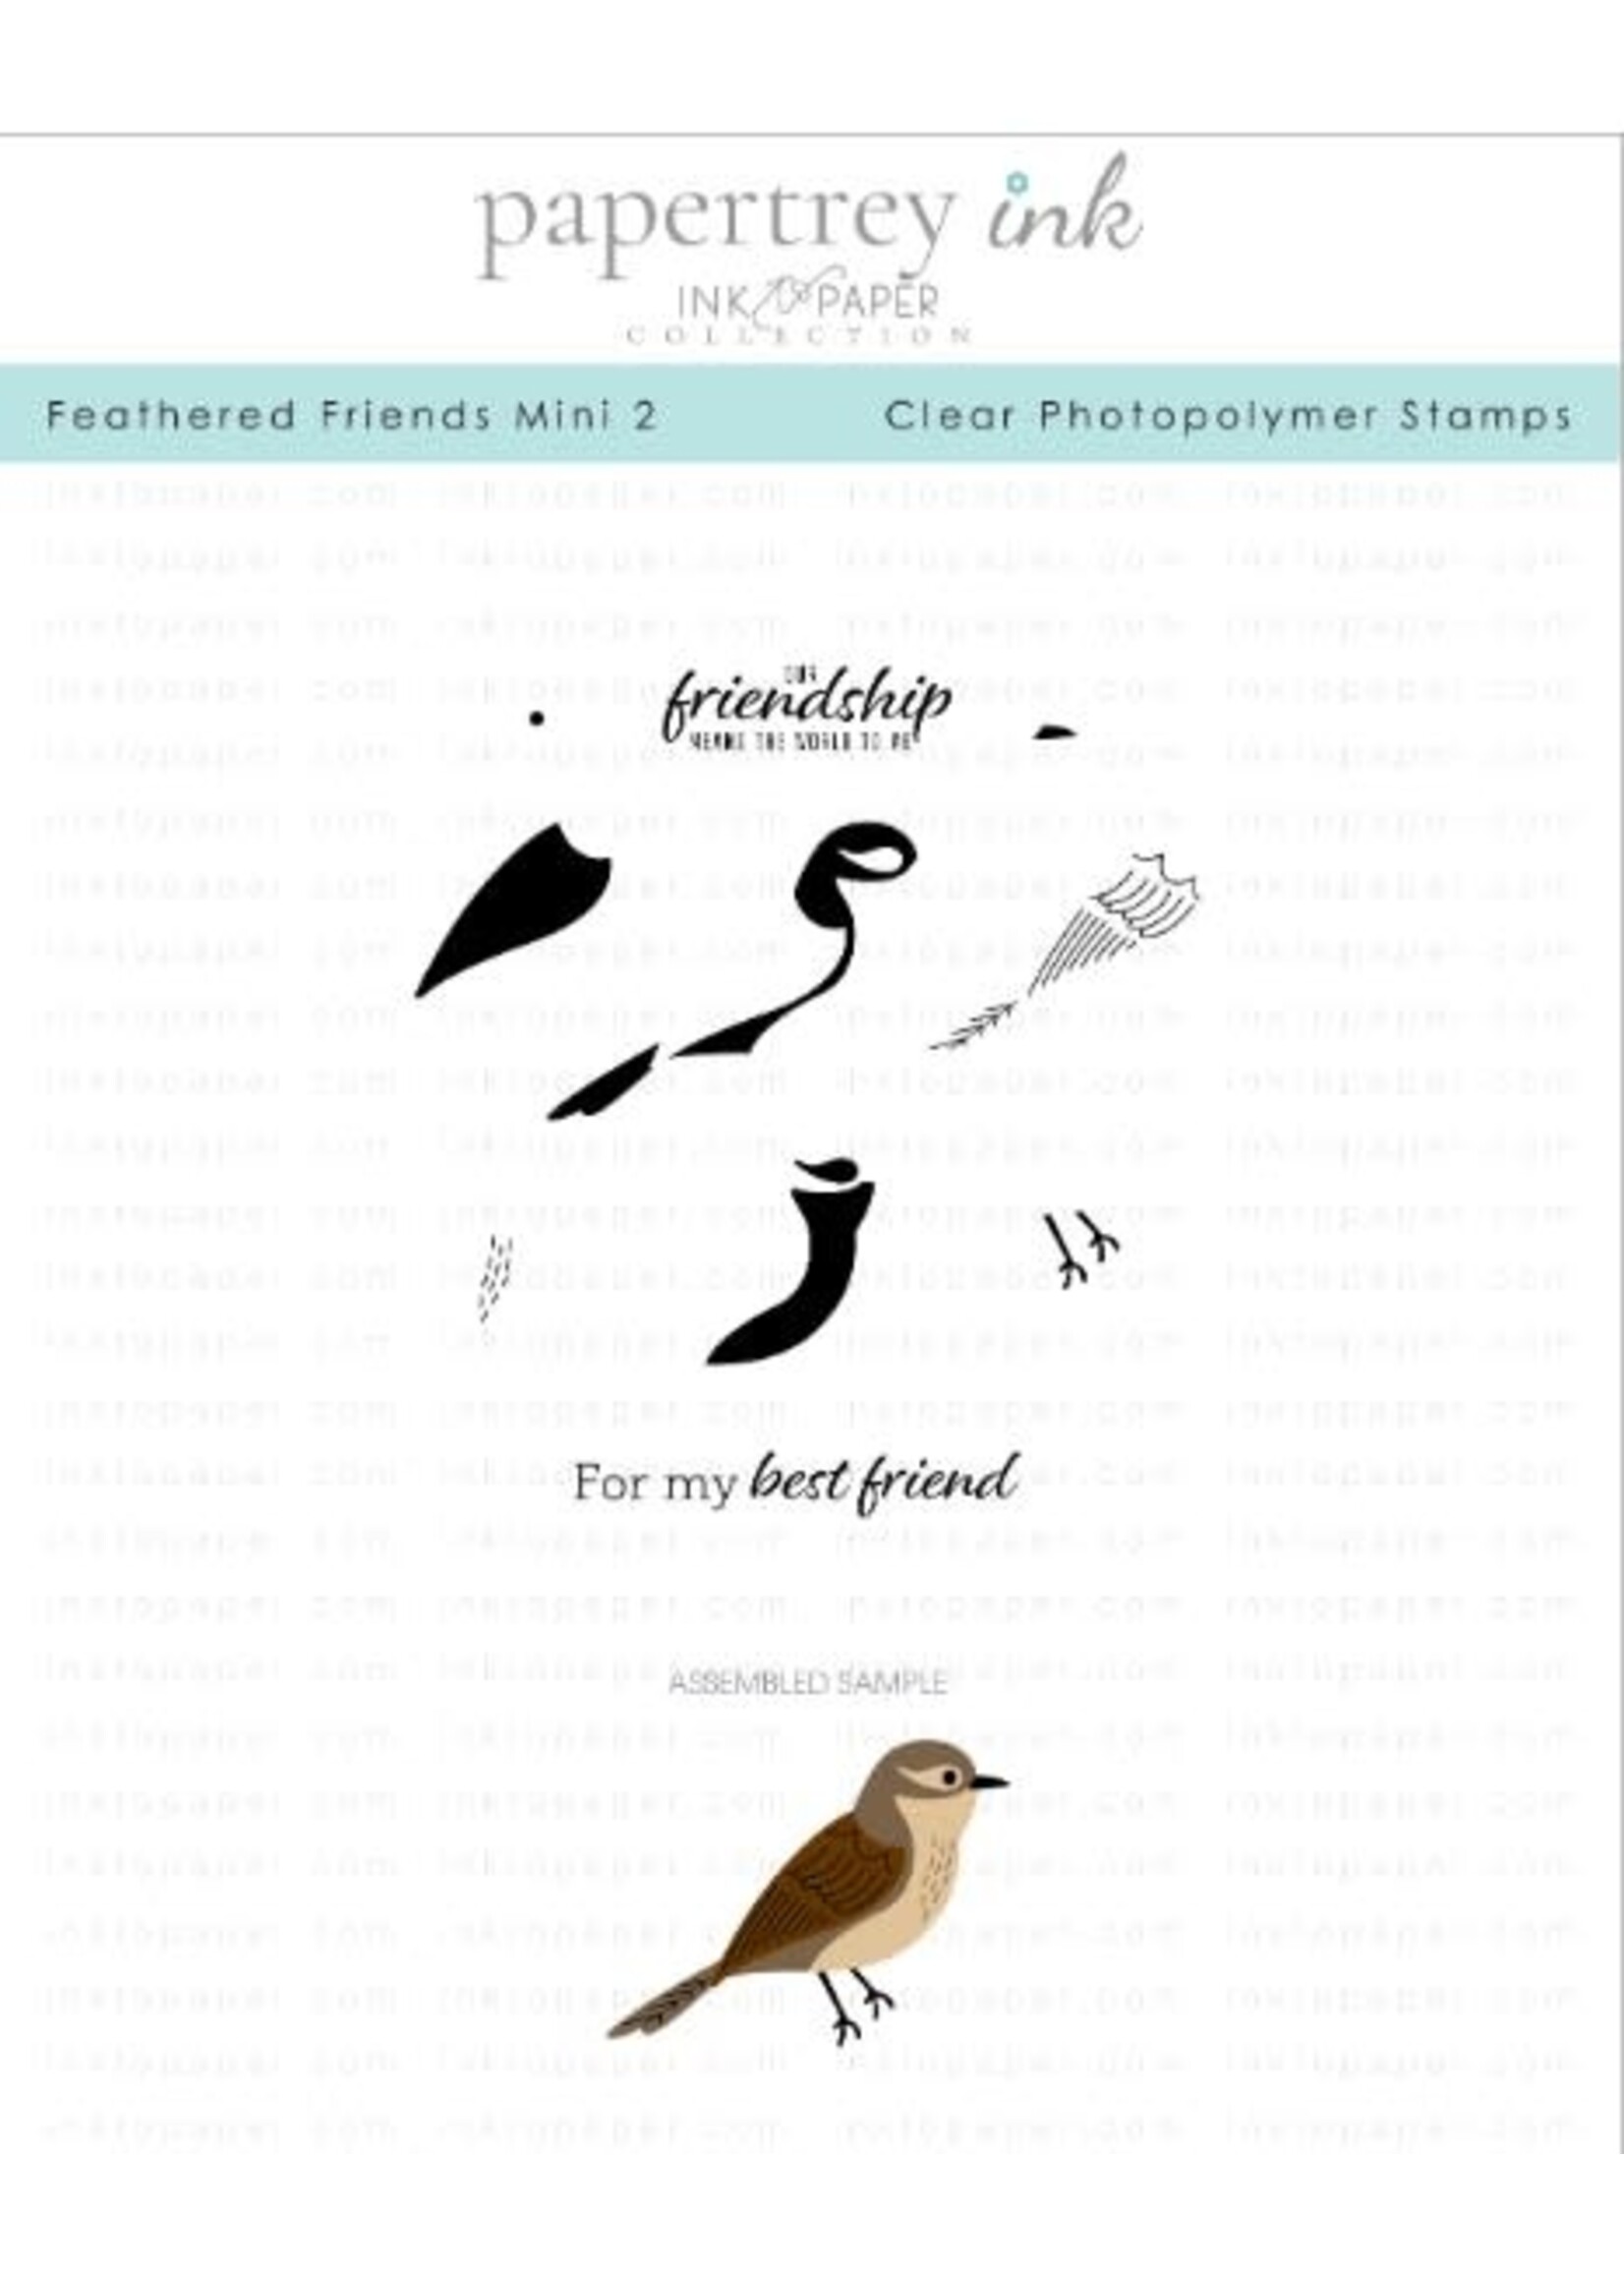 Papertrey Ink Papertrey Ink Stamp, Feathered Friends Mini 2